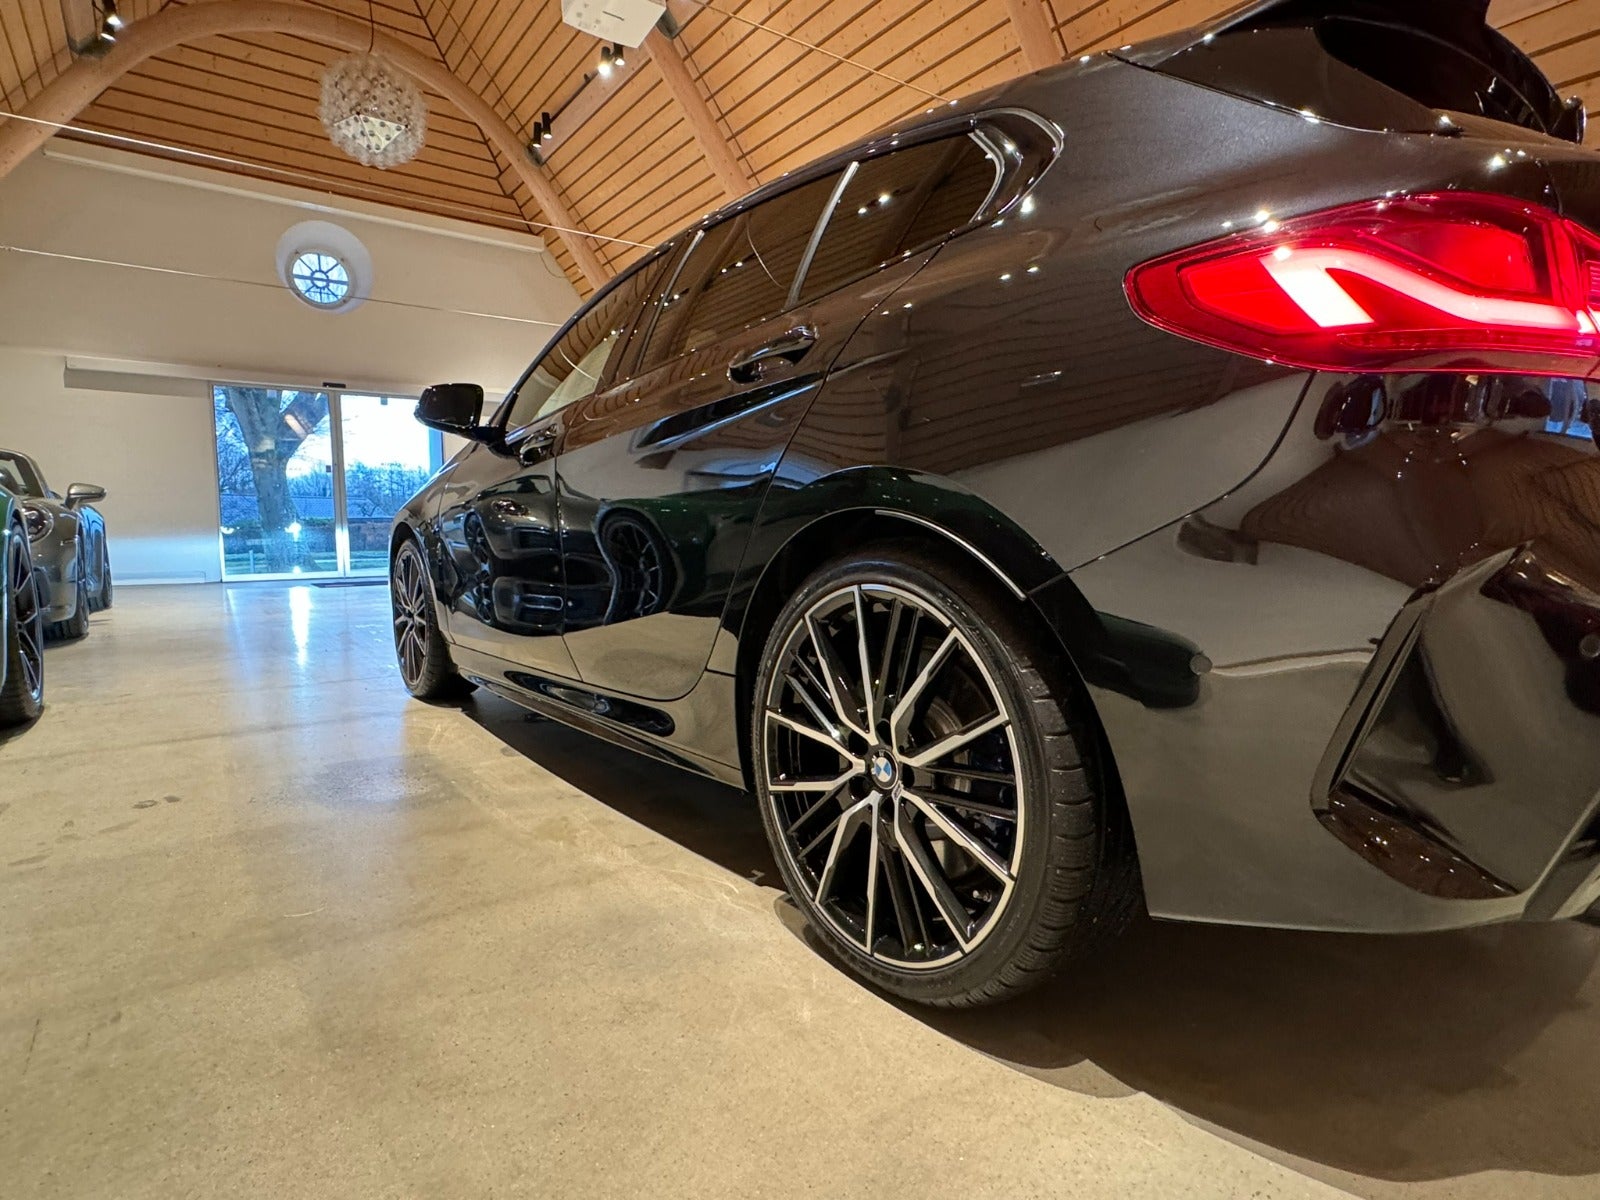 BMW M135i Connected xDrive aut.